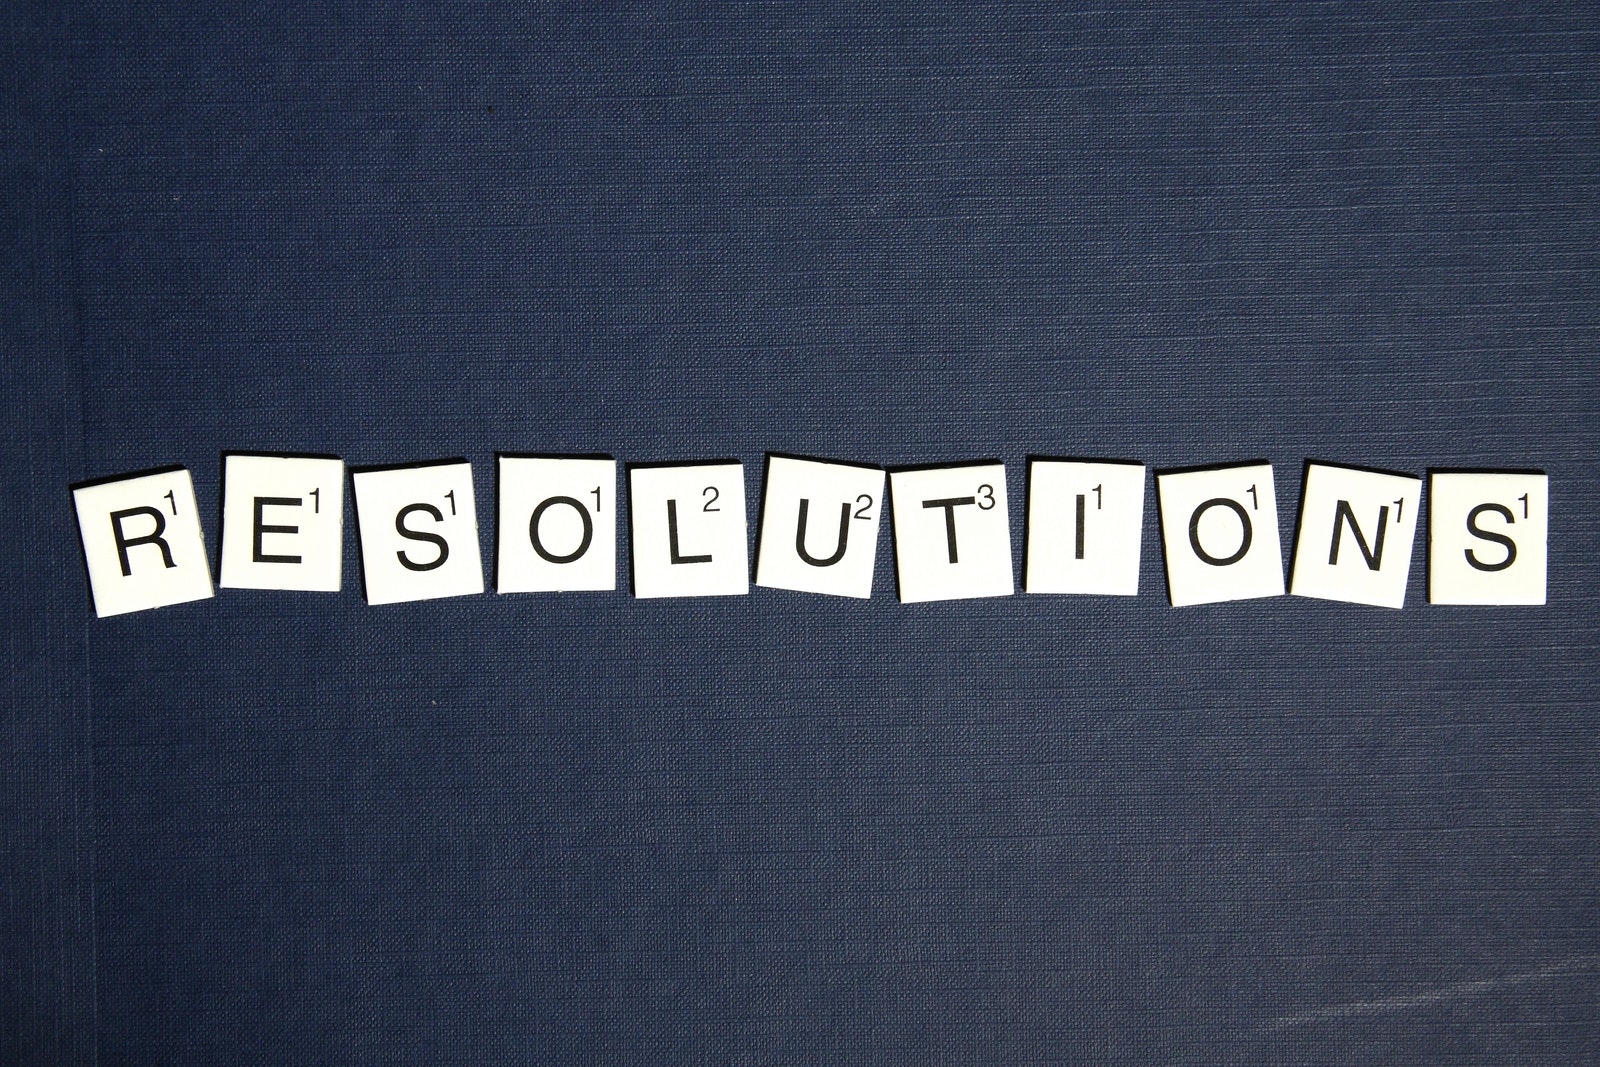 Resolutions in scrabble letters